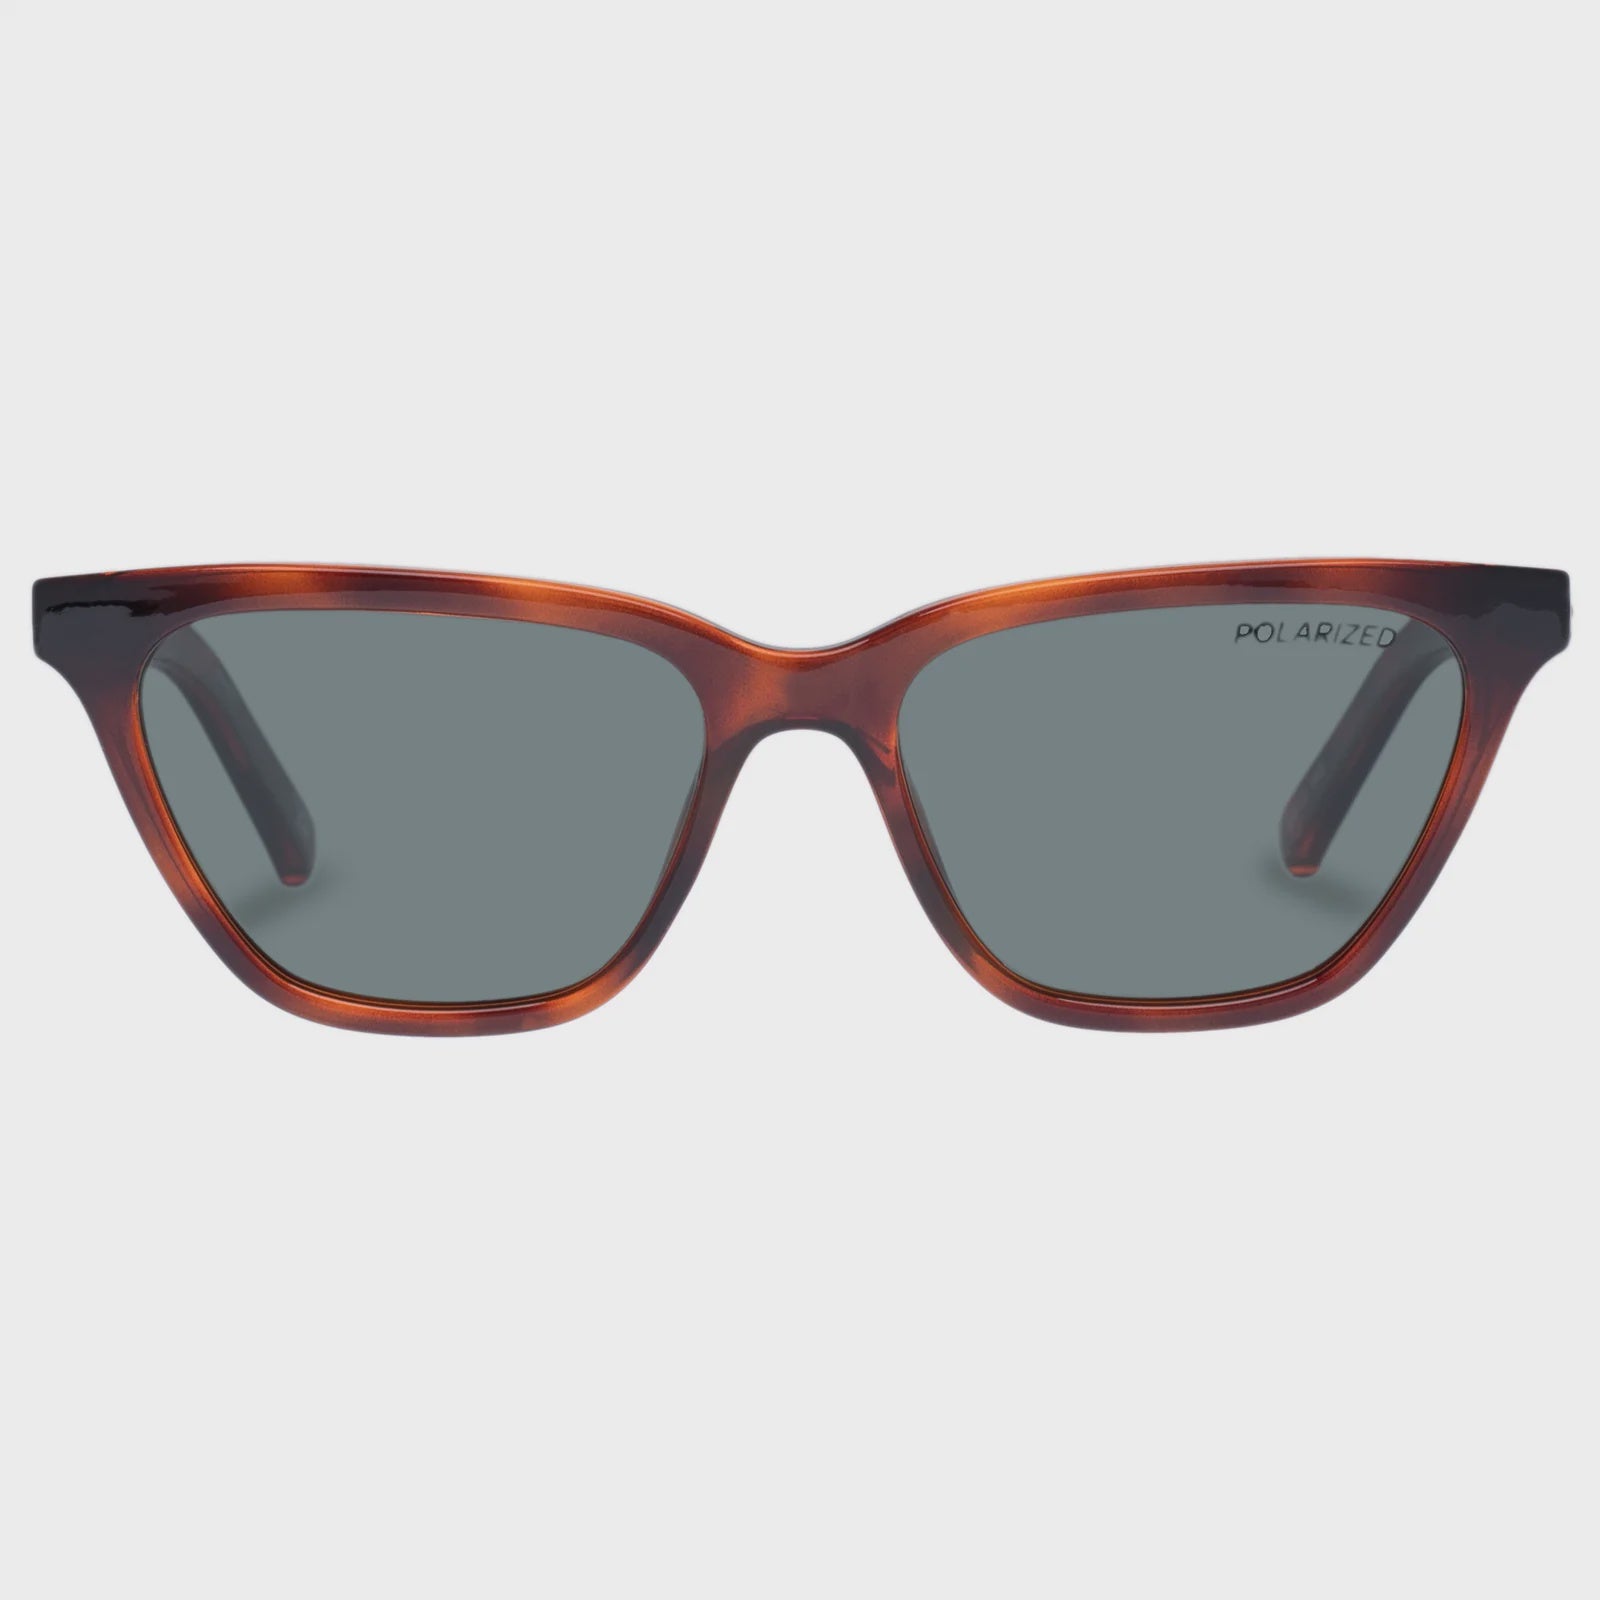 LE SPECS - UNFAITHFUL SUNGLASSES IN TOFFEE TORT - POLARIZED